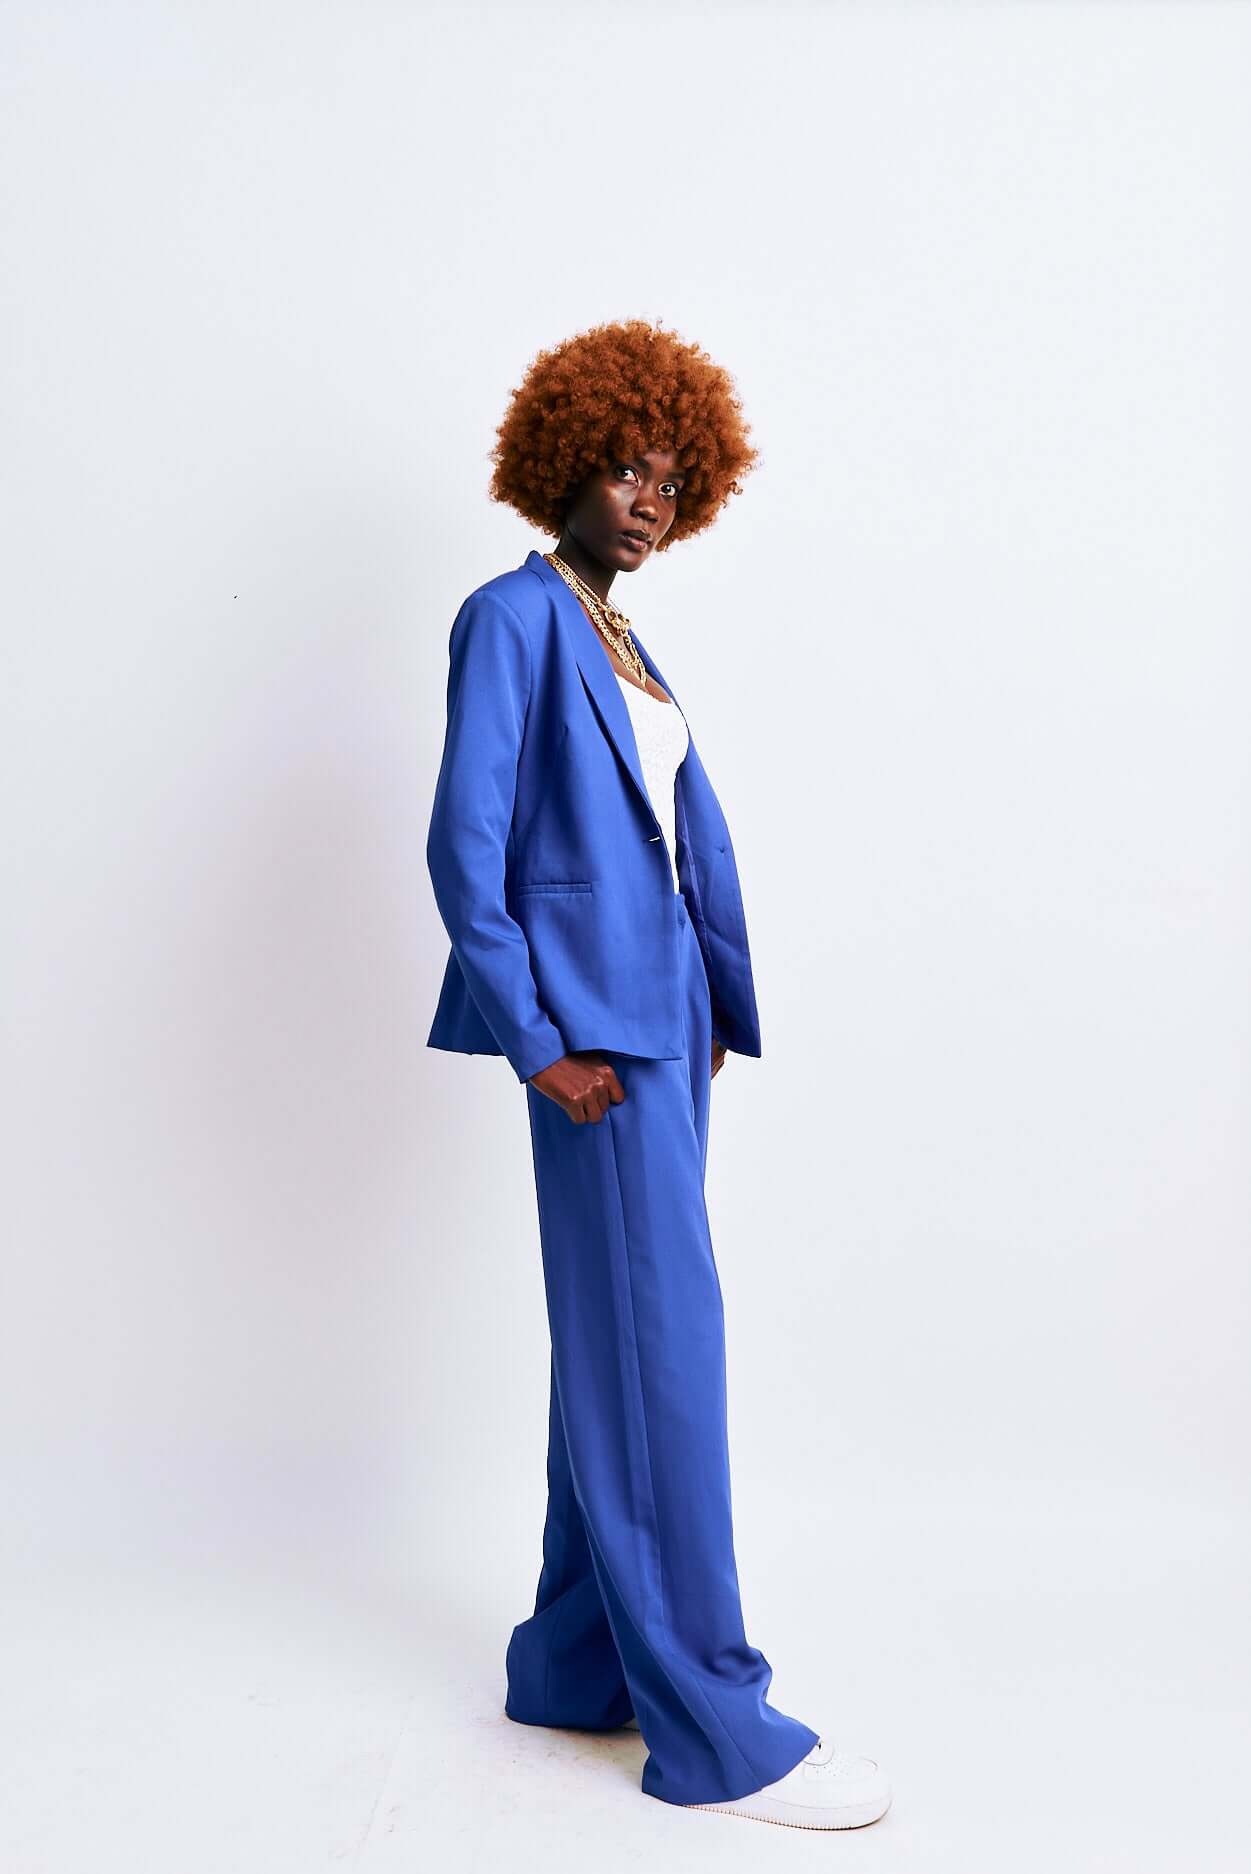 Shop Full Sleeved Single Breasted Blazer by The Fashion Frenzy on Arrai. Discover stylish, affordable clothing, jewelry, handbags and unique handmade pieces from top Kenyan & African fashion brands prioritising sustainability and quality craftsmanship.